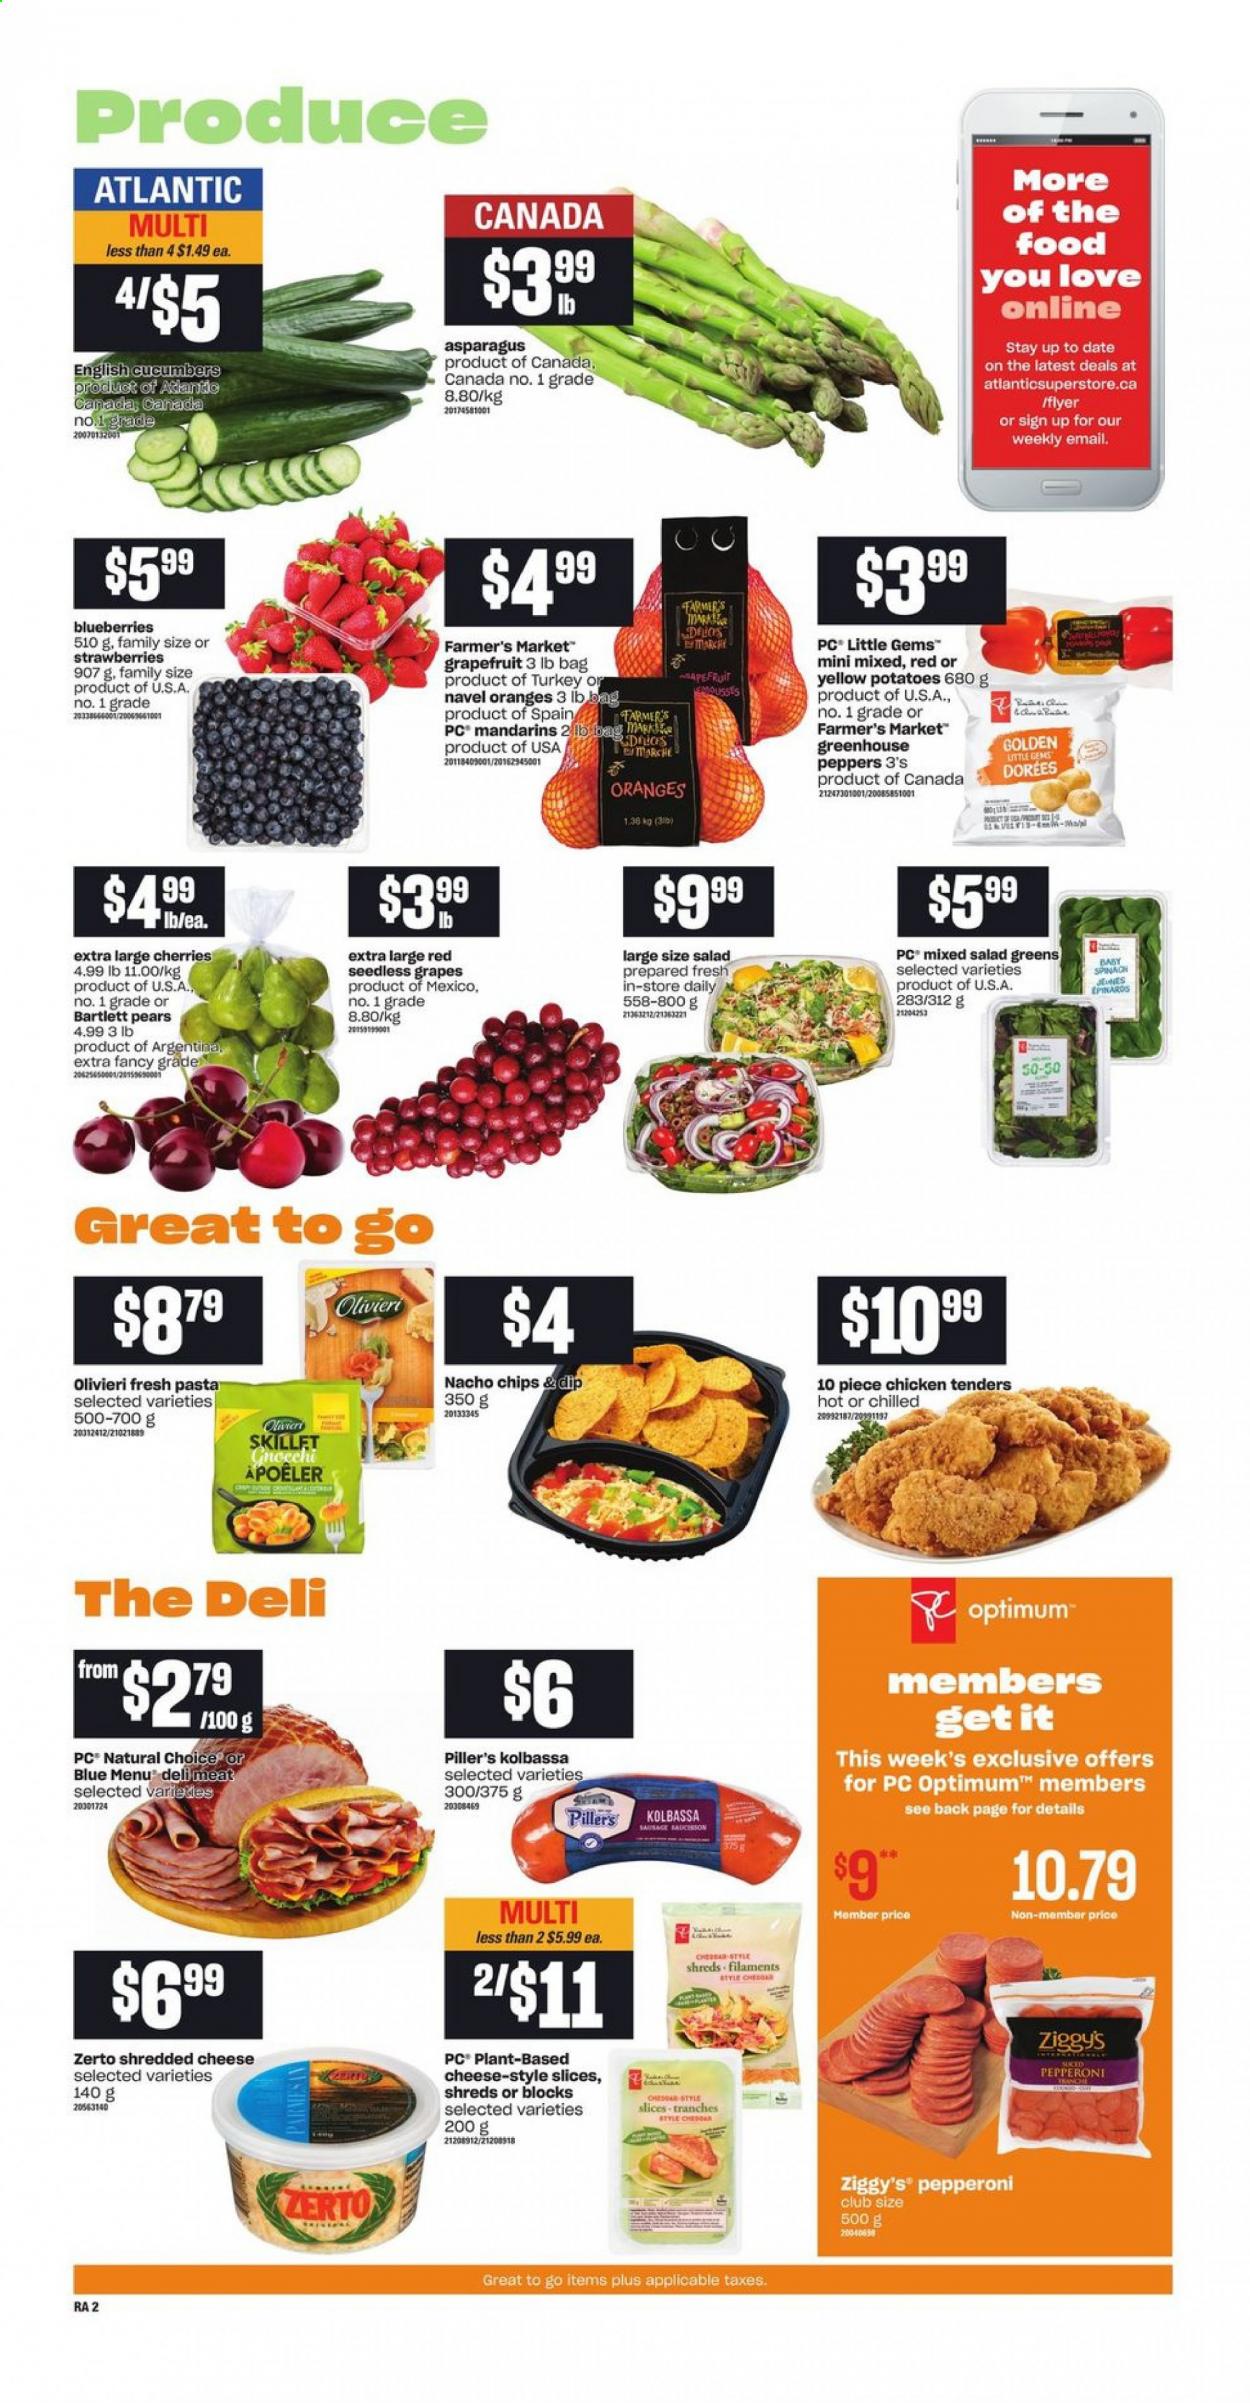 thumbnail - Atlantic Superstore Flyer - June 03, 2021 - June 09, 2021 - Sales products - asparagus, cucumber, spinach, potatoes, salad, salad greens, peppers, Bartlett pears, blueberries, grapefruits, grapes, mandarines, seedless grapes, strawberries, cherries, pears, navel oranges, pepperoni, shredded cheese, parmesan, dip, chicken tenders, Optimum, chips. Page 3.